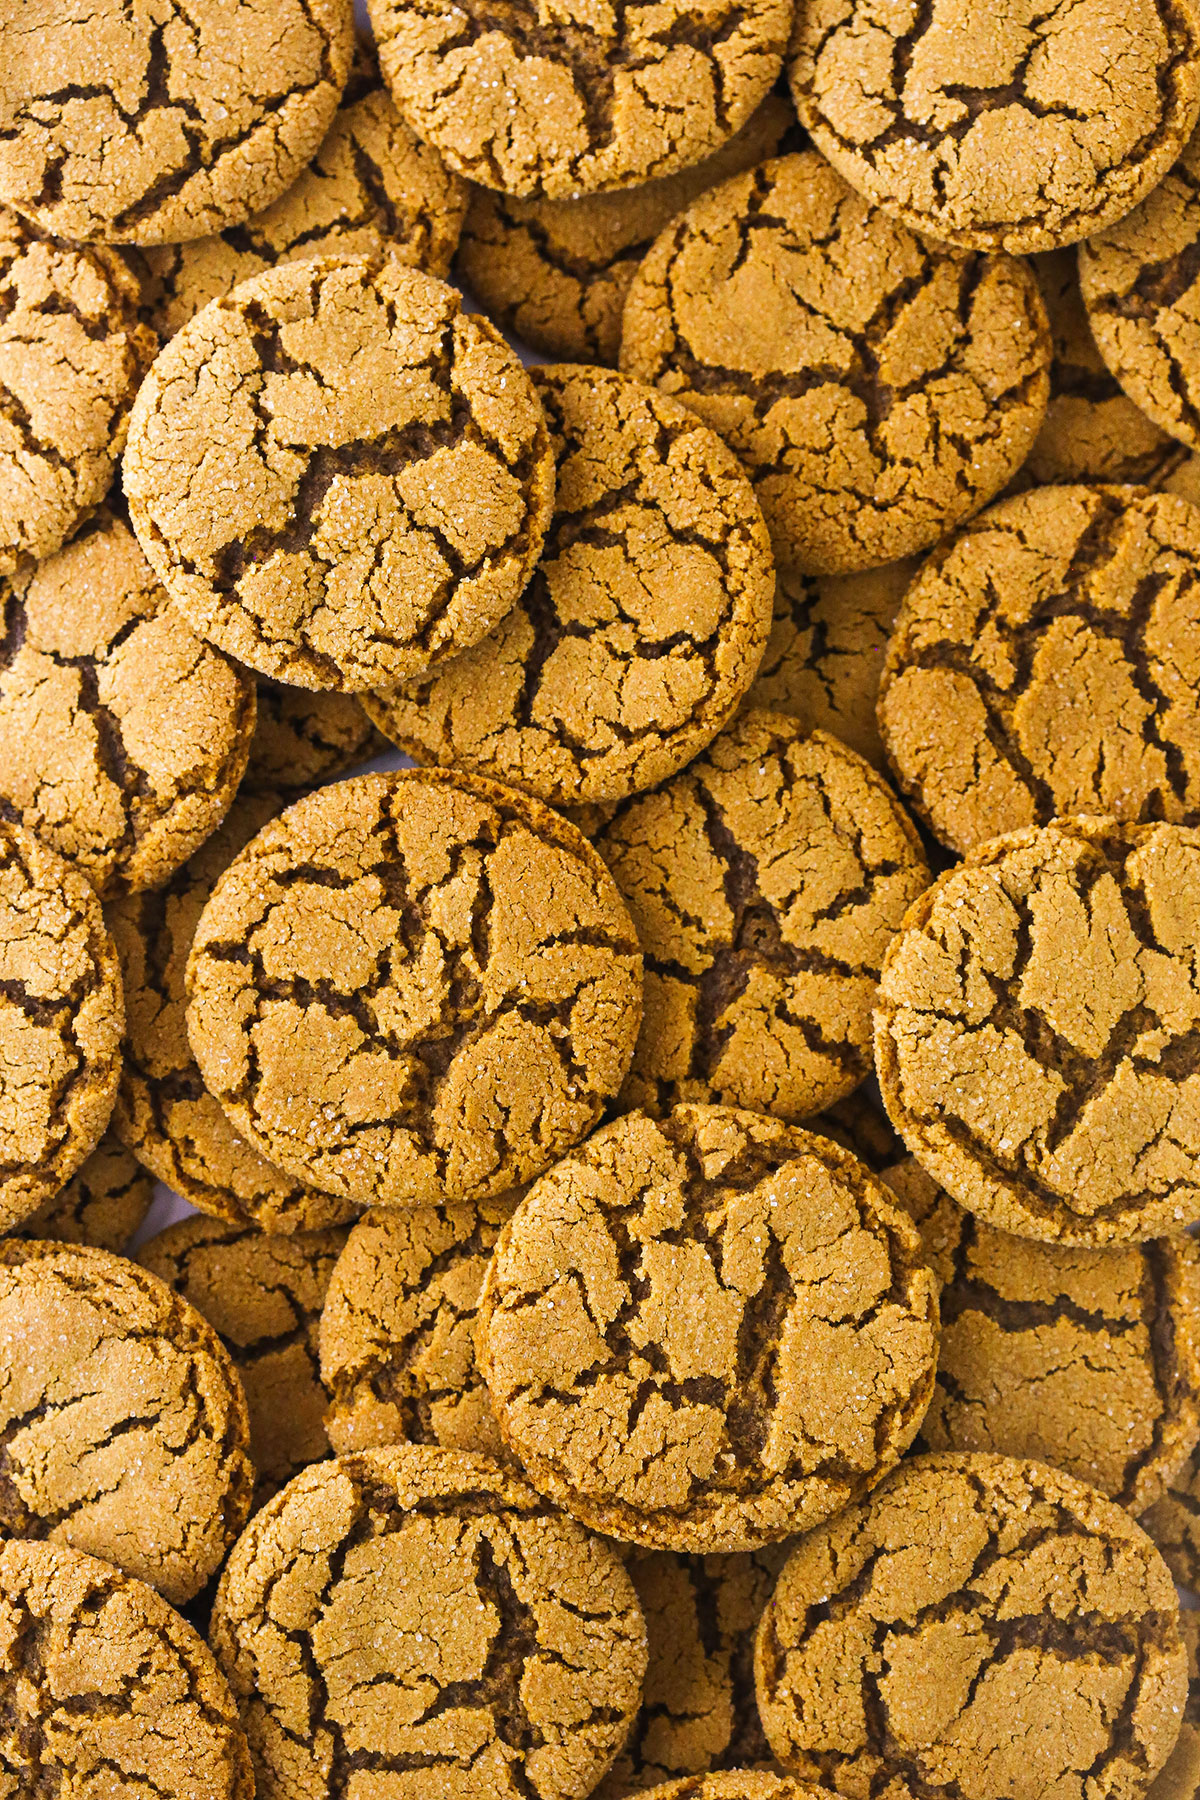 A large pile of homemade gingersnaps with crackly tops